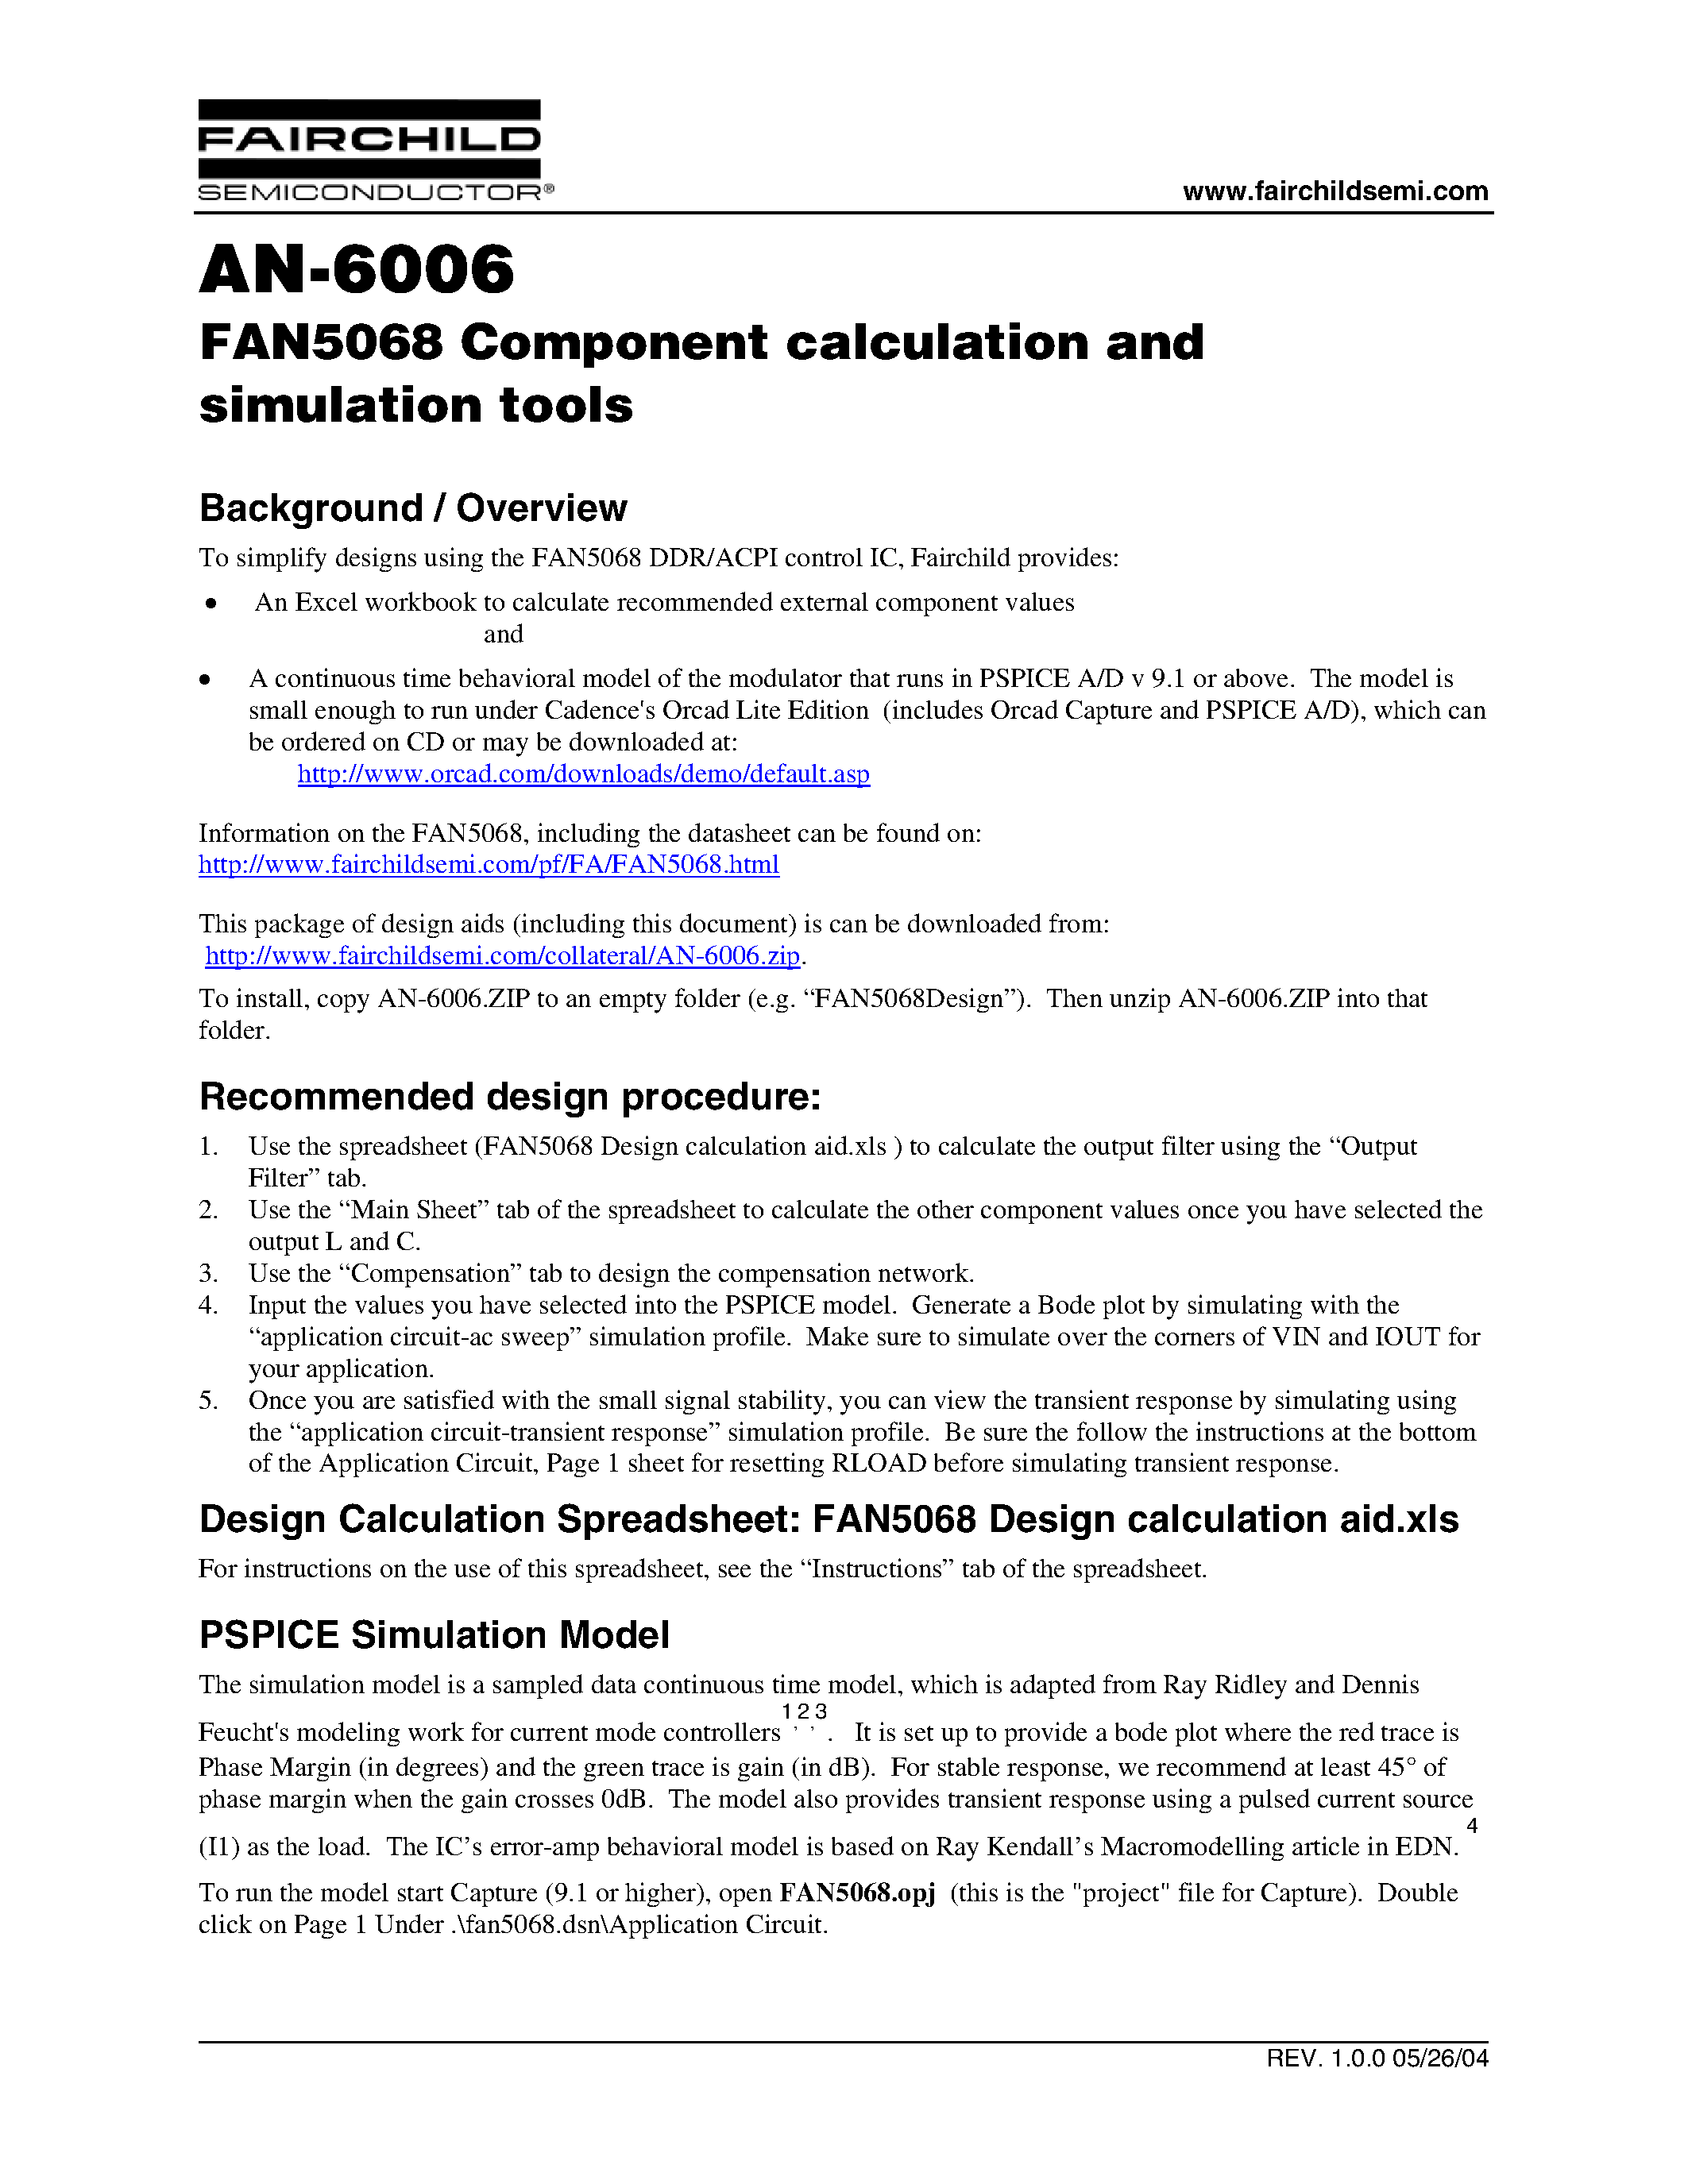 Datasheet FAN5068ACPI - FAN5068 Component calculation and simulation tools page 1